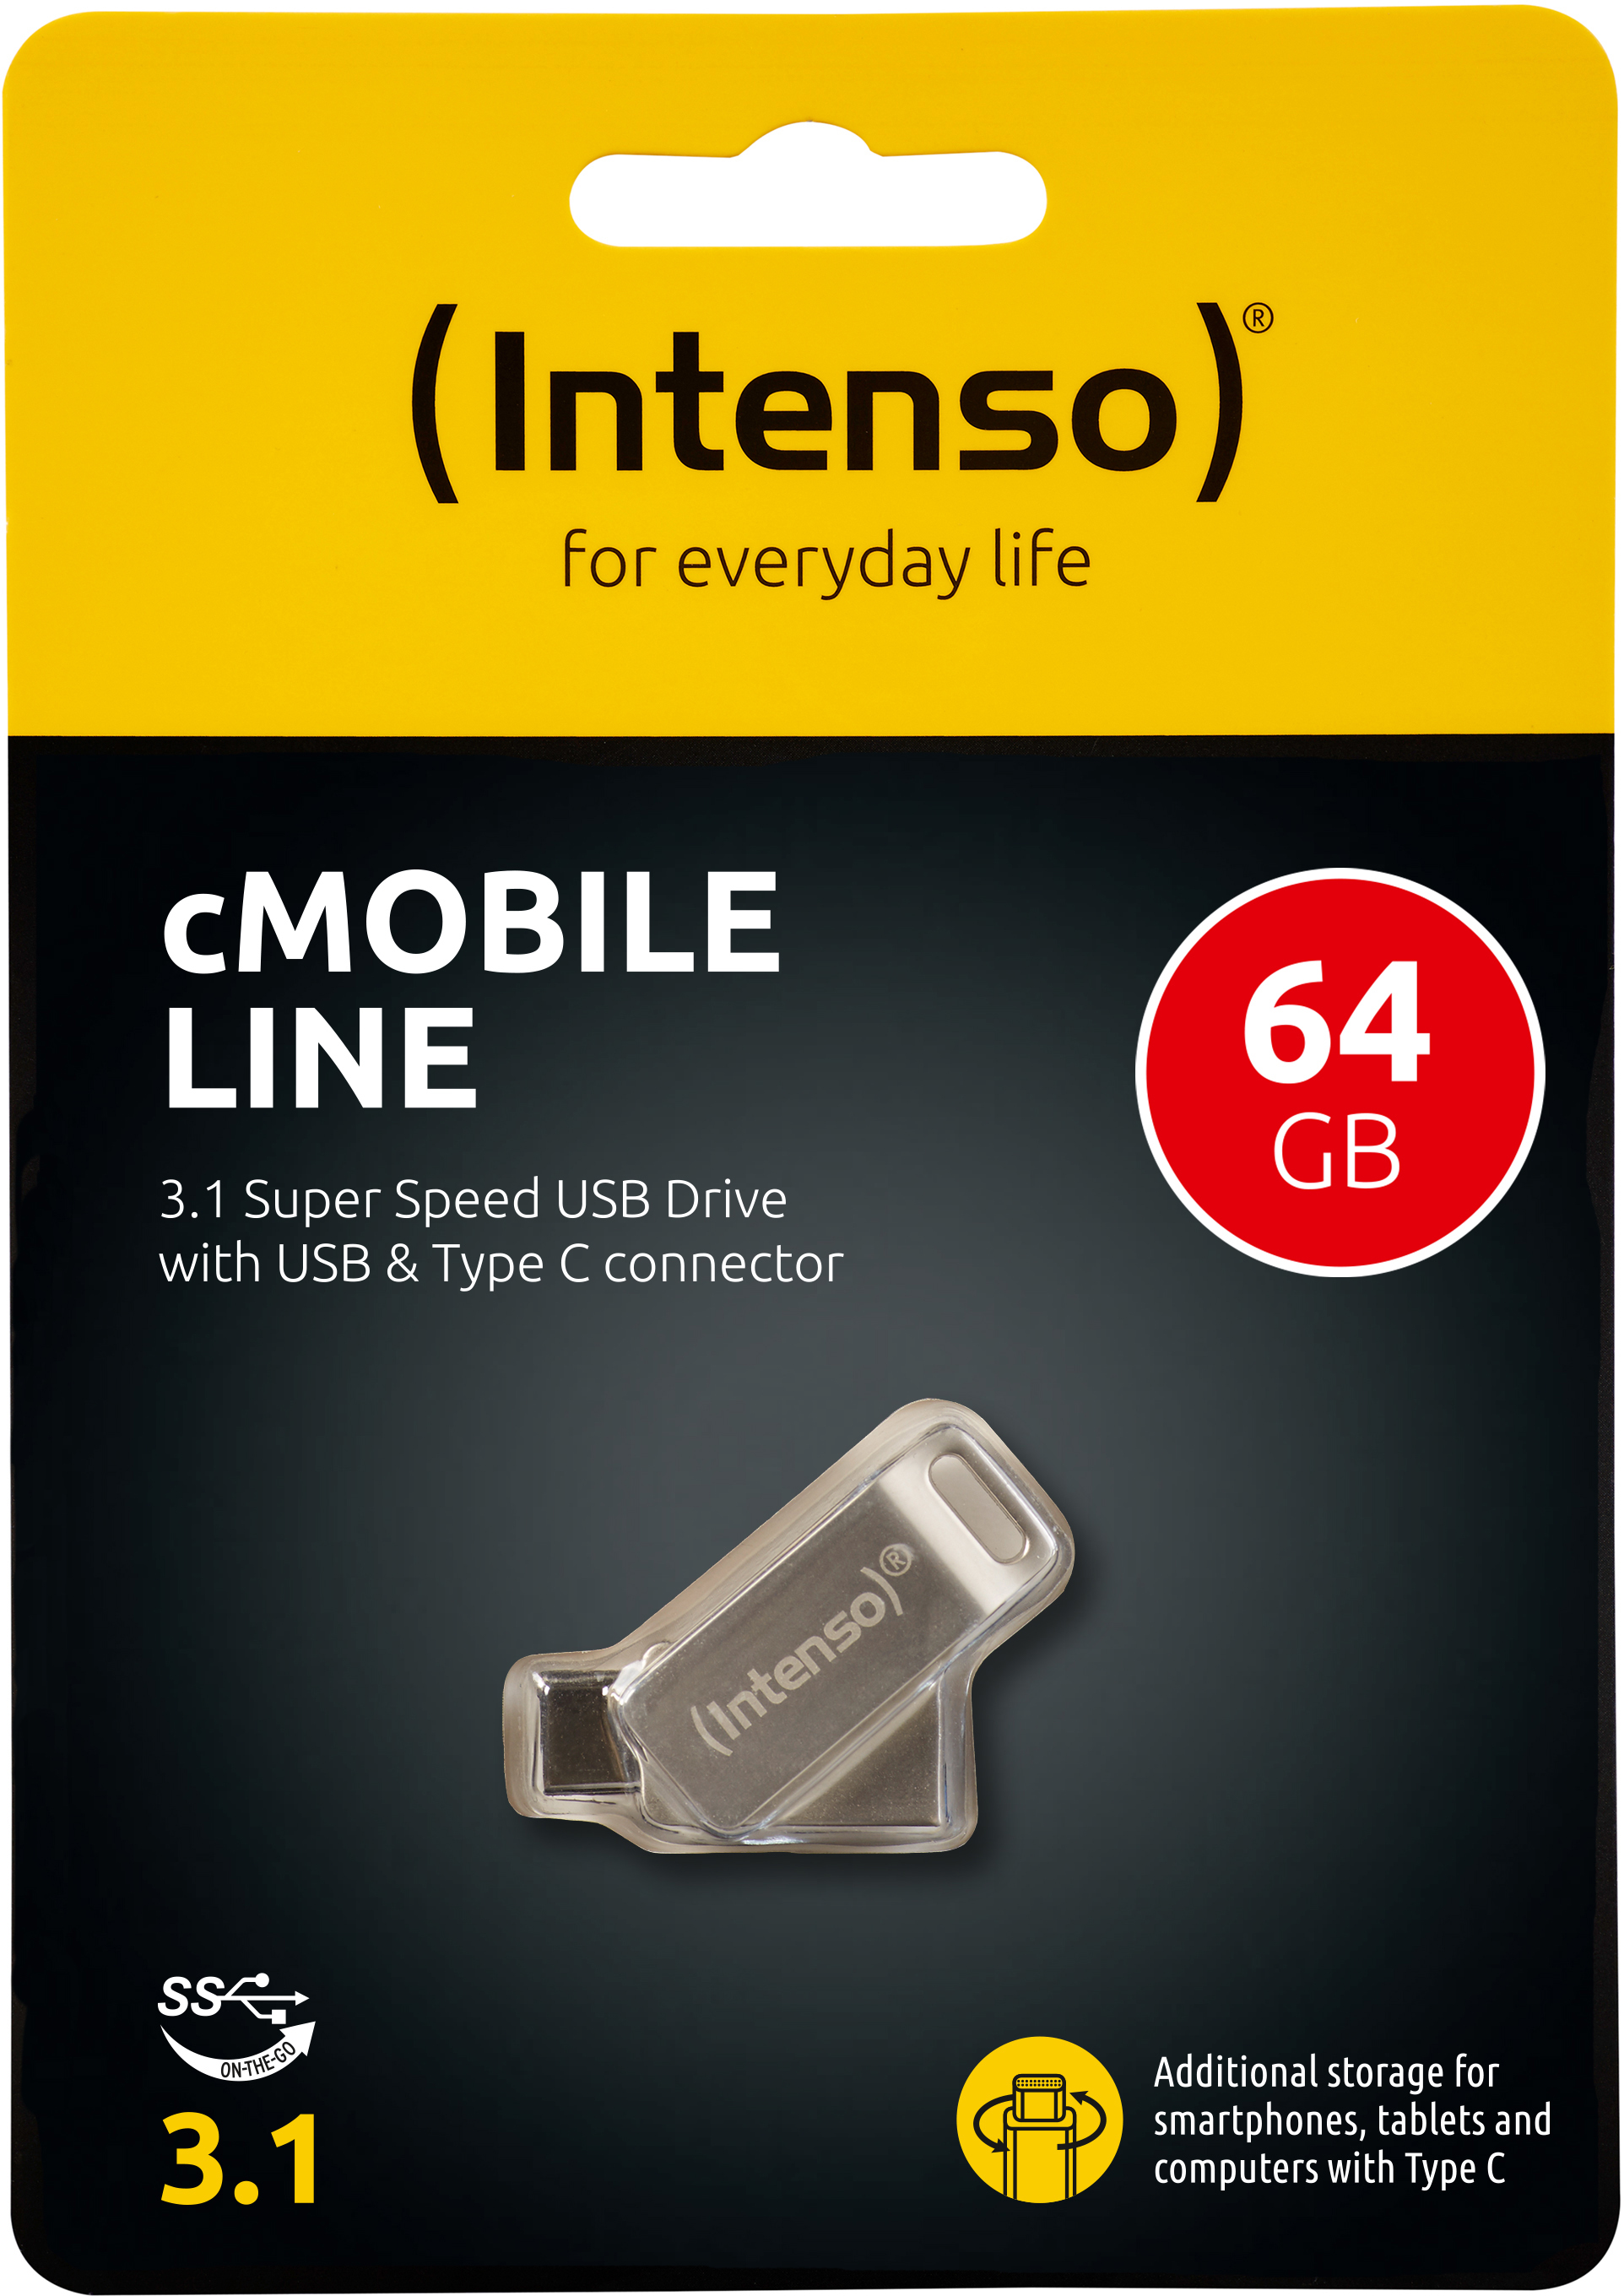 70 LINE USB-Stick, MB/s, Silber INTENSO 64 GB, CMOBILE